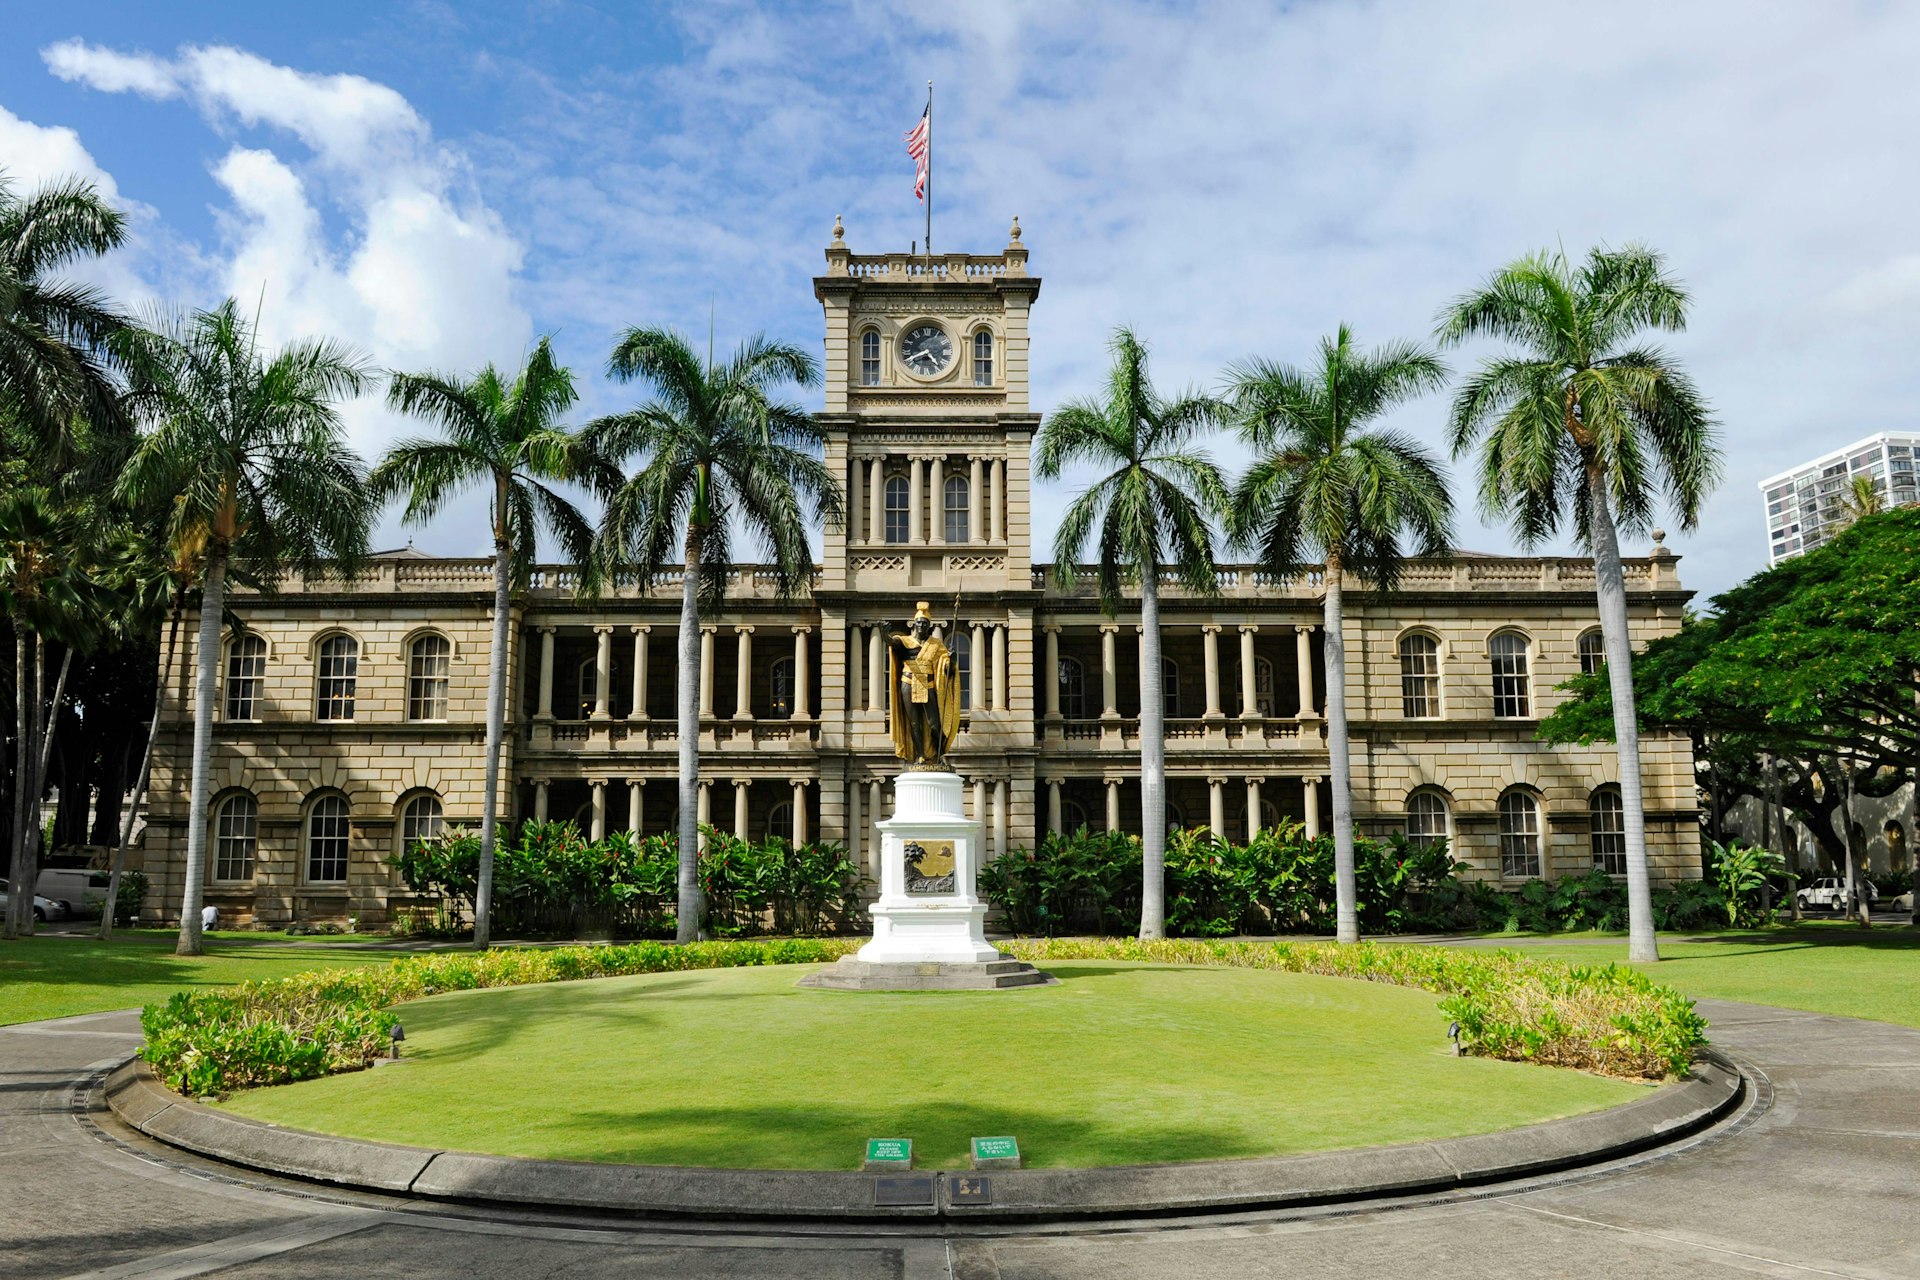 The Aliʻiolani Hale courthouse is frequently used as police headquarters in the modern remake of Hawaii Five-0. Image by Dennis Macdonald / Getty